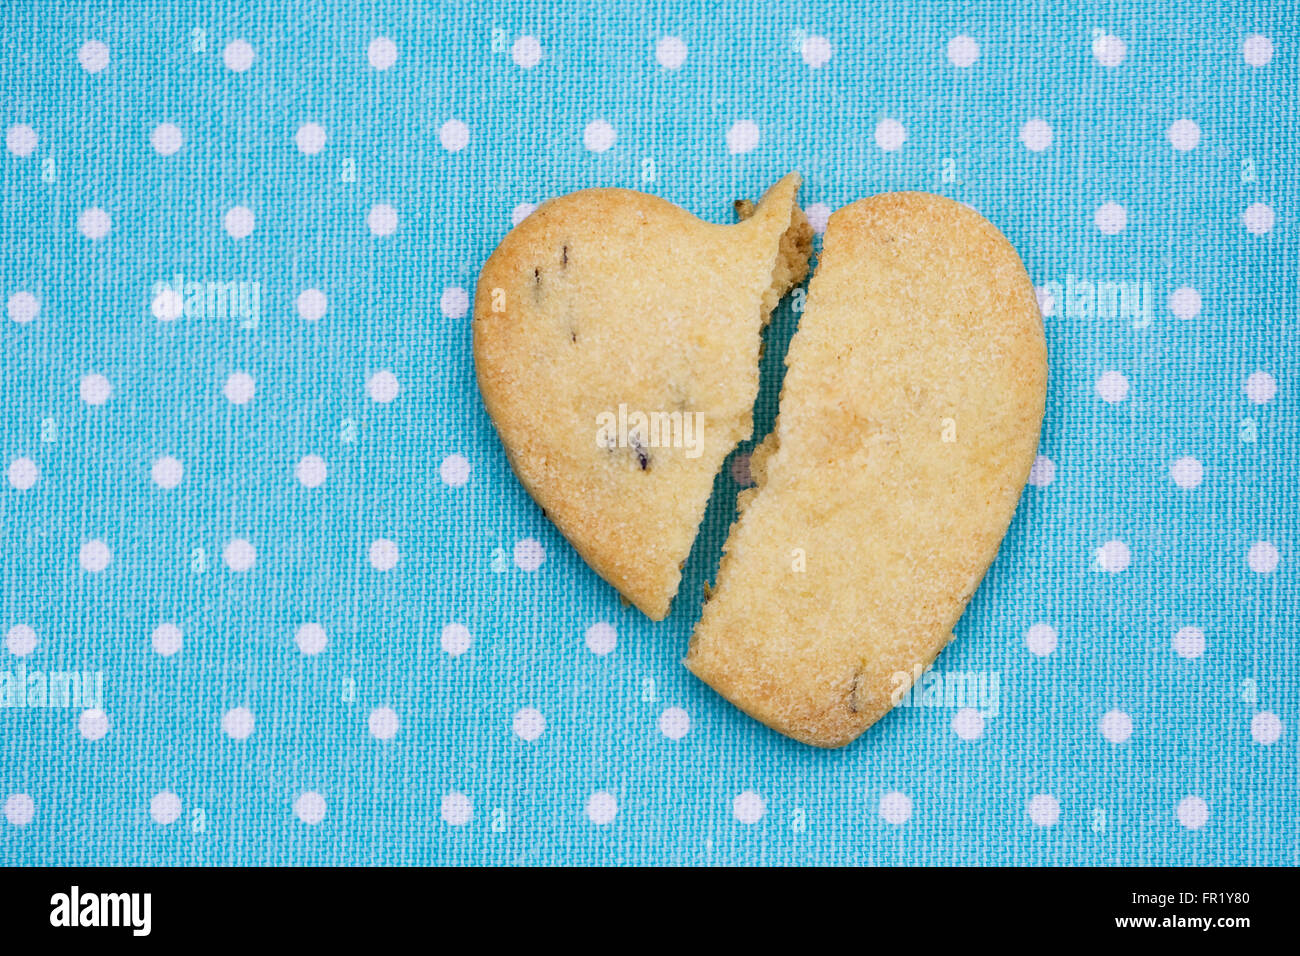 A broken heart shaped biscuit on a blue spotty background. Stock Photo